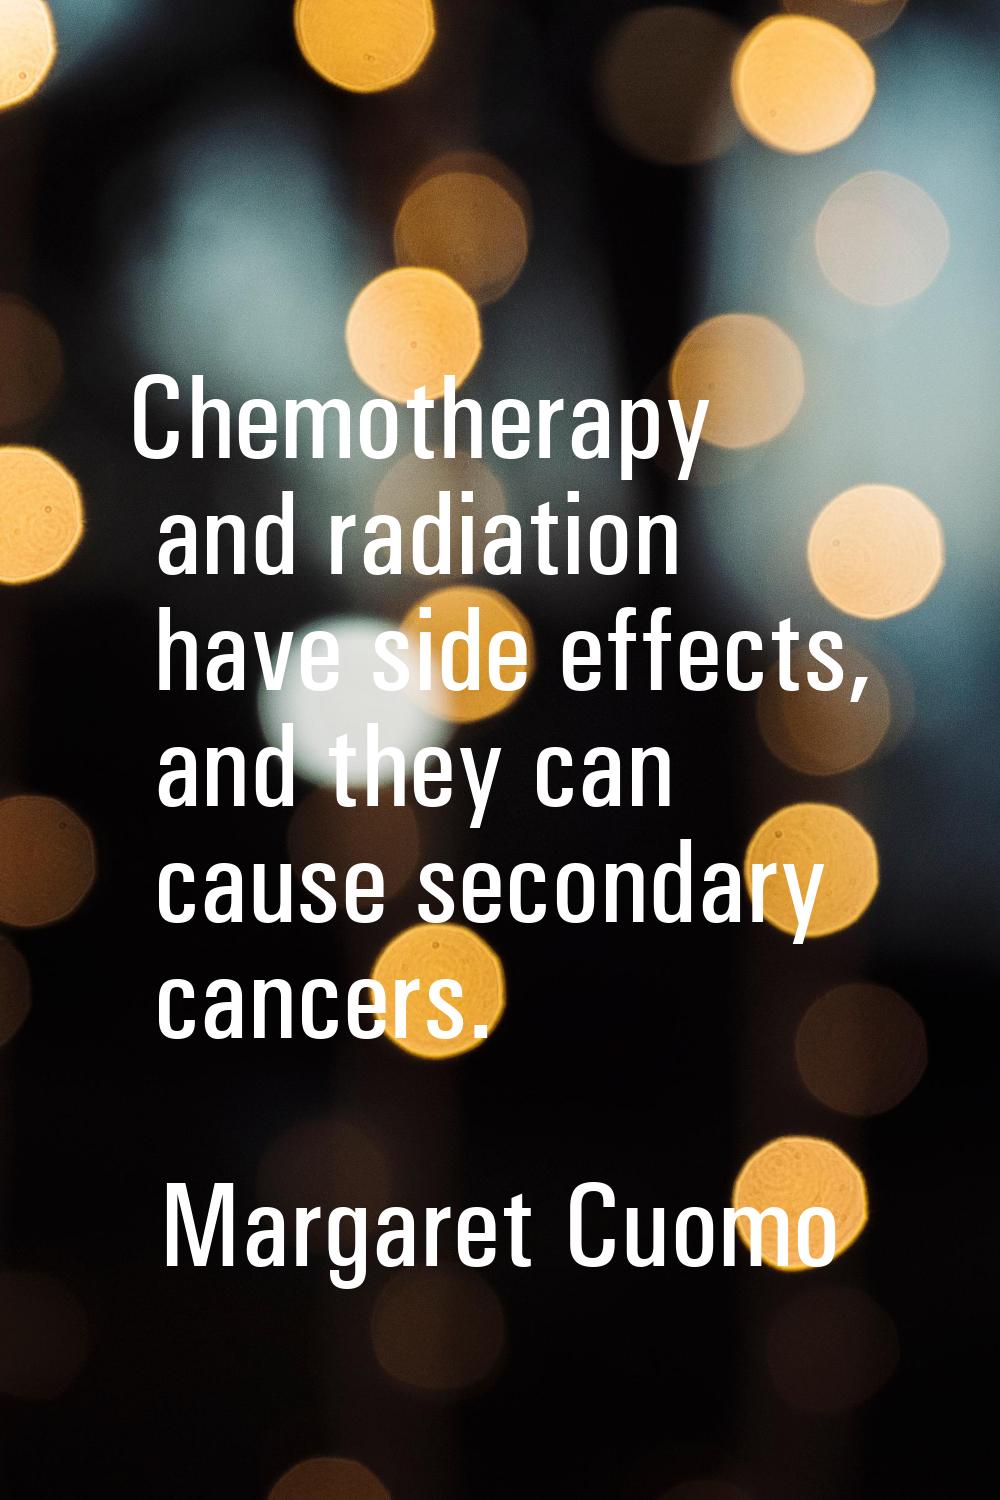 Chemotherapy and radiation have side effects, and they can cause secondary cancers.